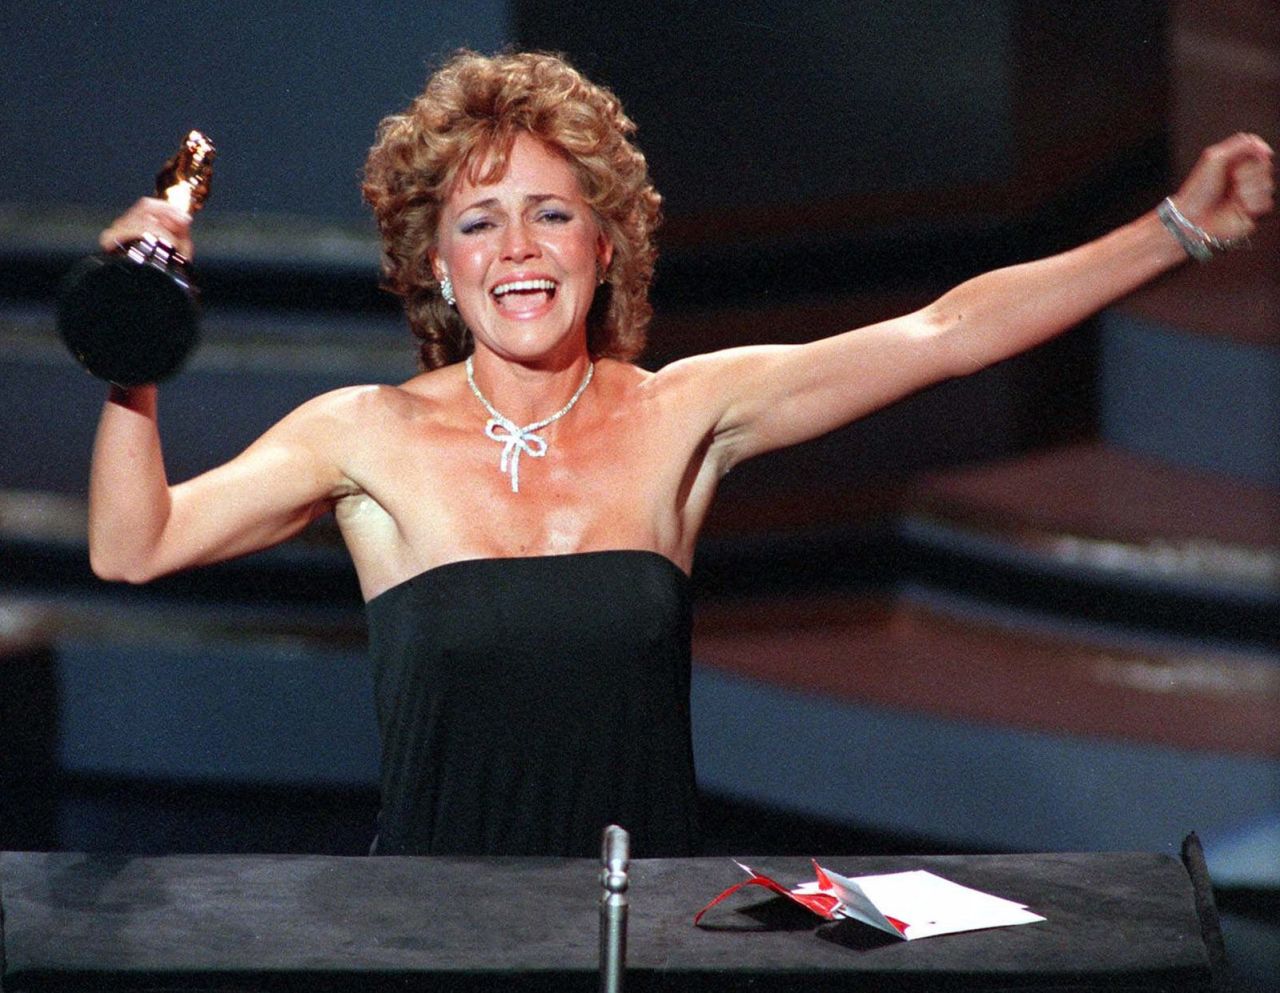 Field accepts the Oscar for best actress in 1985. It was her second Academy Award, and she won it for her role in "Places in the Heart." During her speech, she said: "I can't deny the fact that you like me. Right now, you like me!" The memorable moment is often misquoted today.